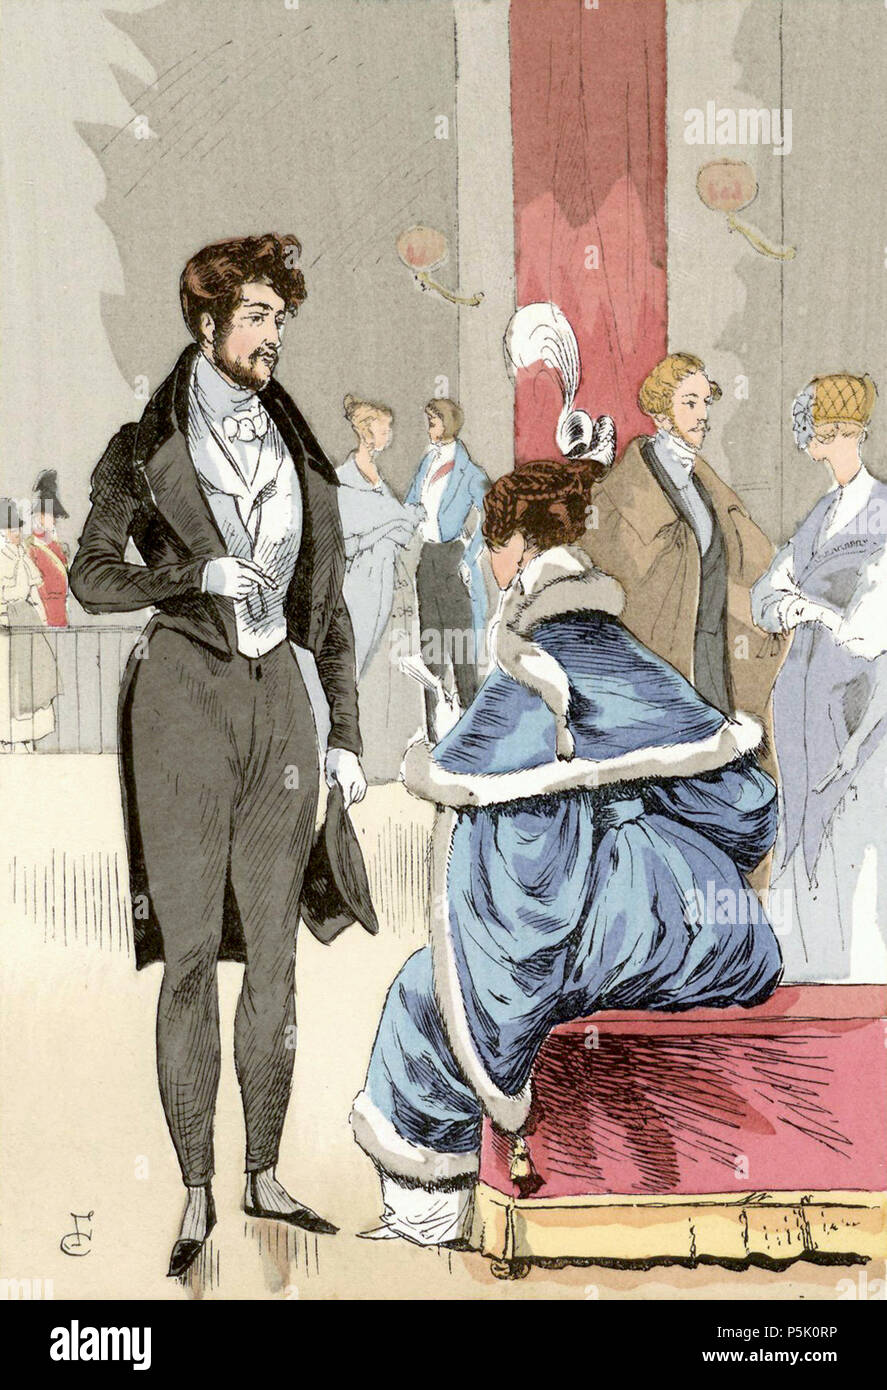 Dandyism in the Romantic period a ballroom in 1834. The gentleman is wearing tight fitting pants, that are lighter than his coat. His pants have boot straps as well, reminiscent of an English riding costume. He wears a short-waisted coat with basques (or tails) à l'anglaise, or longer tails. In his hand, he carries a haut-de-forme (or top-hat). He is dressed rather somberly, reminiscent of the spirit of the 'spleen' during the Romantic Period. The woman seated in front of the man wears a fur-trimmed blue dress and a white feather in her hair. Abstract source: Boucher, François. 20,000 Years of Stock Photo